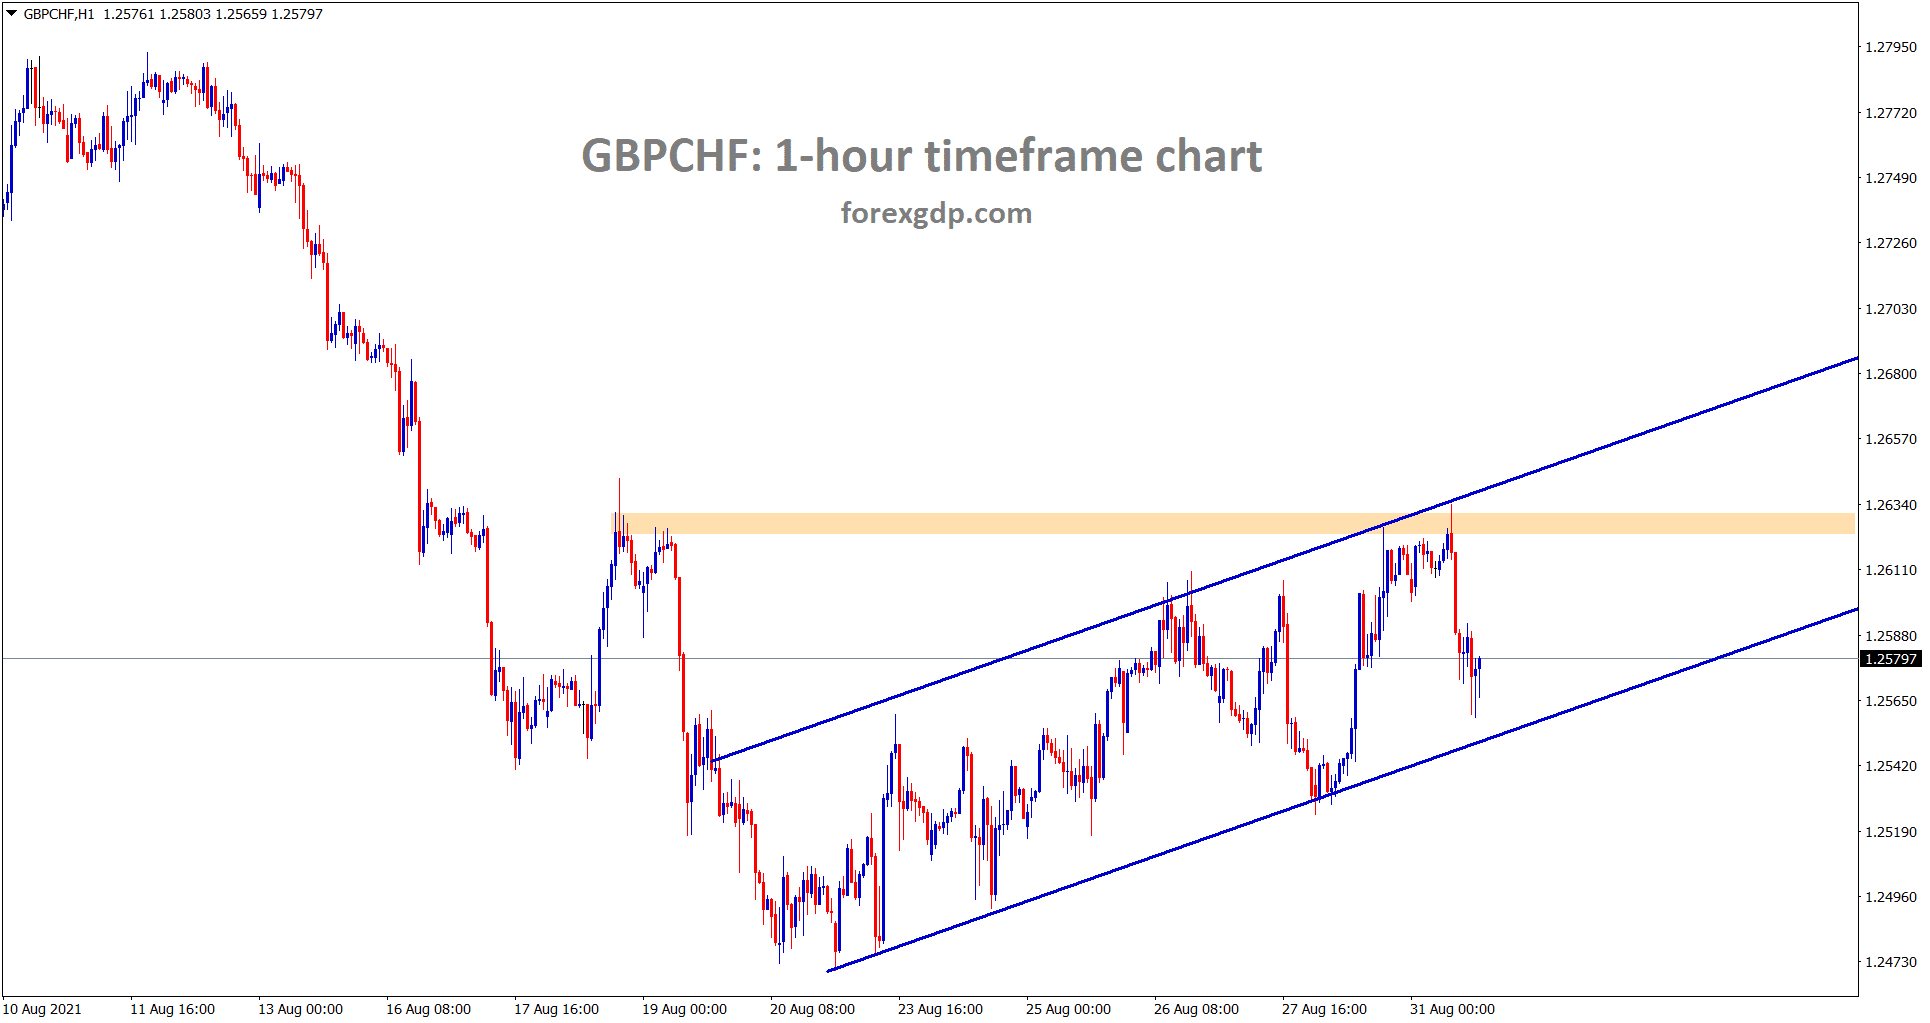 GBPCHF is moving in an Ascending channel in the hourly timeframe chart